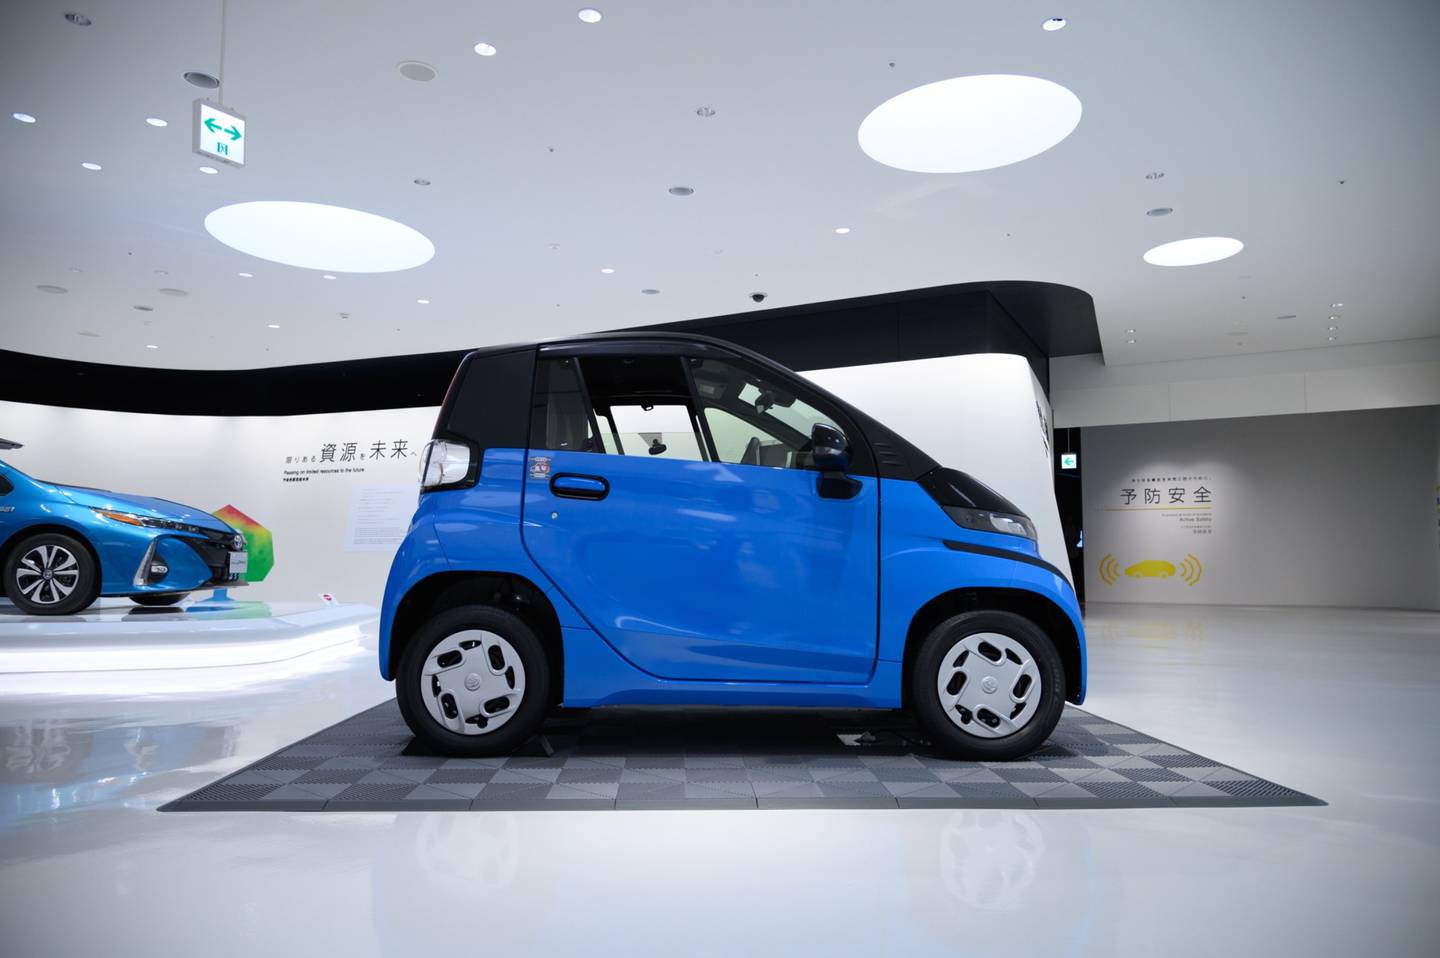 A Toyota Motor Corp.  C+pod ultra-compact battery electric vehicle on display at the company's showroom in Toyota City, Aichi Prefecture, Japan. Photographer: Akio Kon / Bloomberg